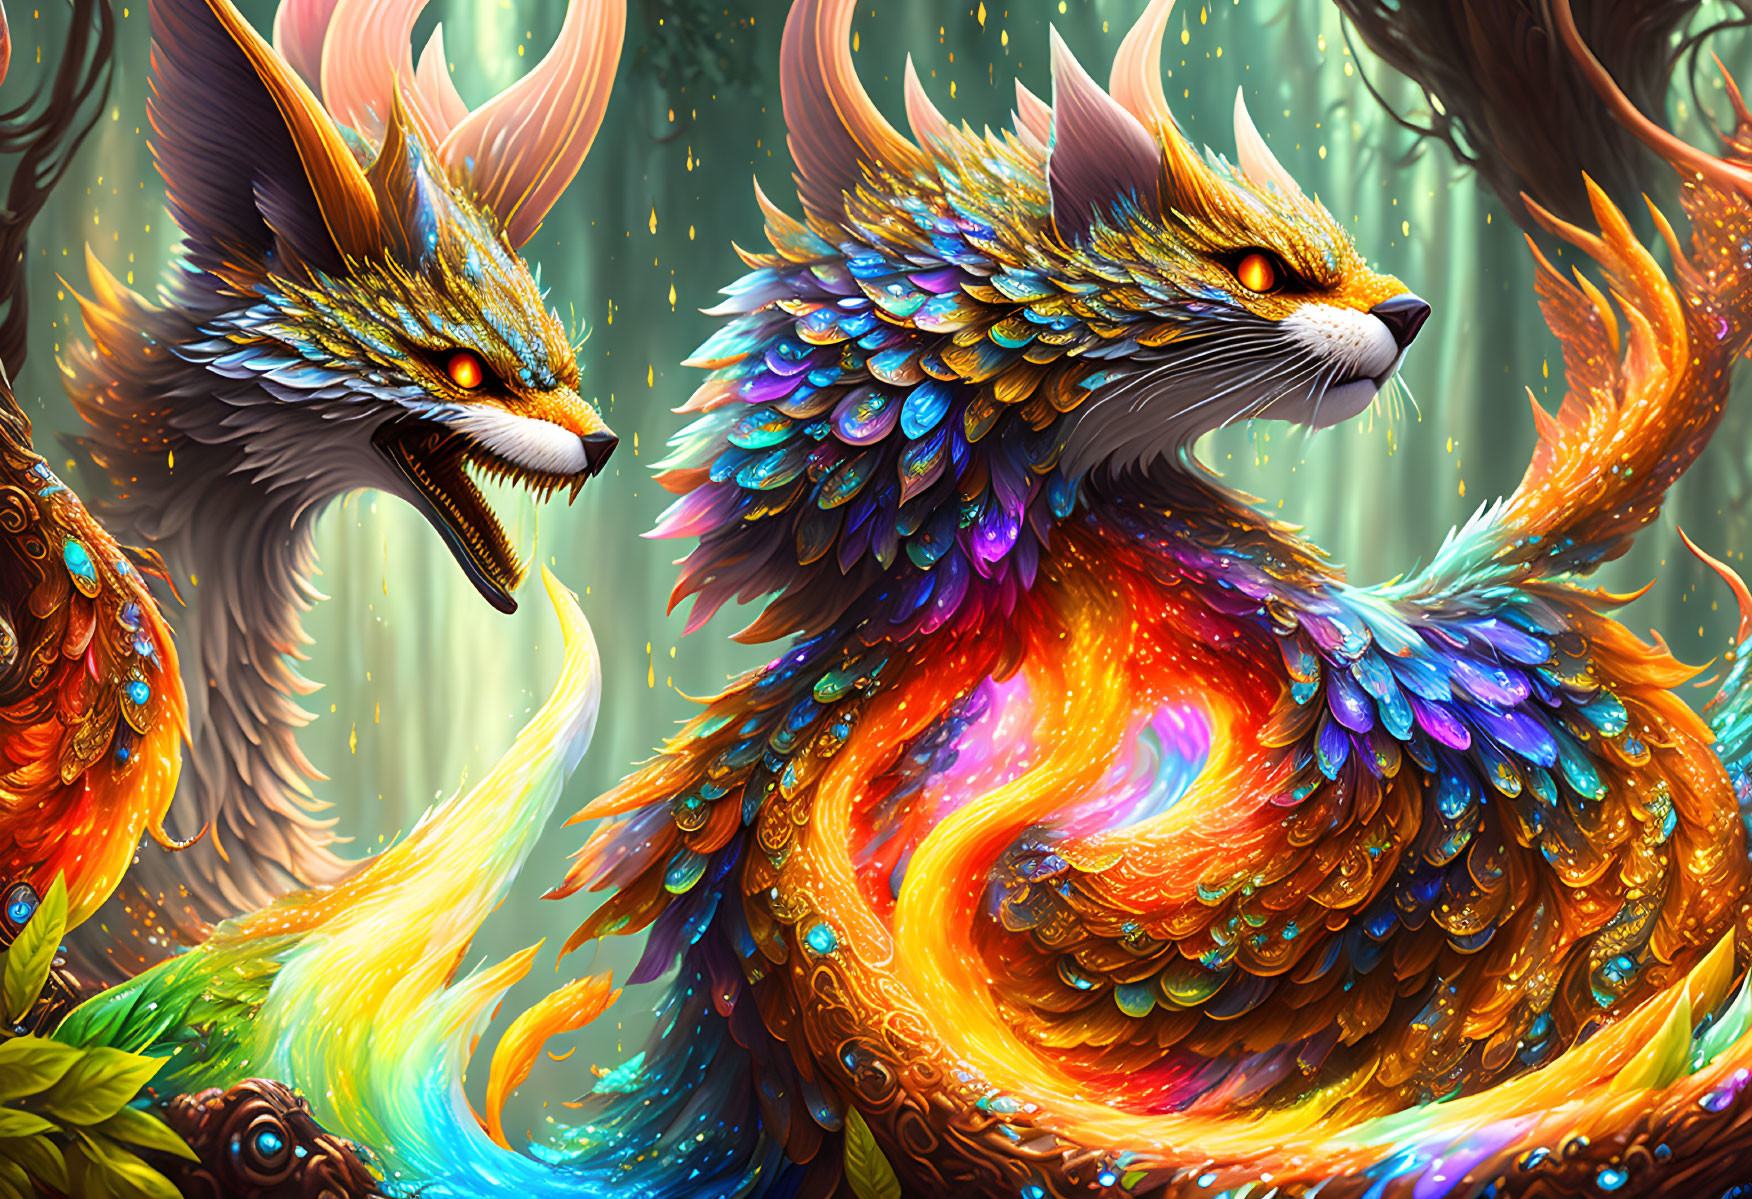 Colorful Forest Scene with Vibrant, Fox-Like Creatures and Iridescent Feathers